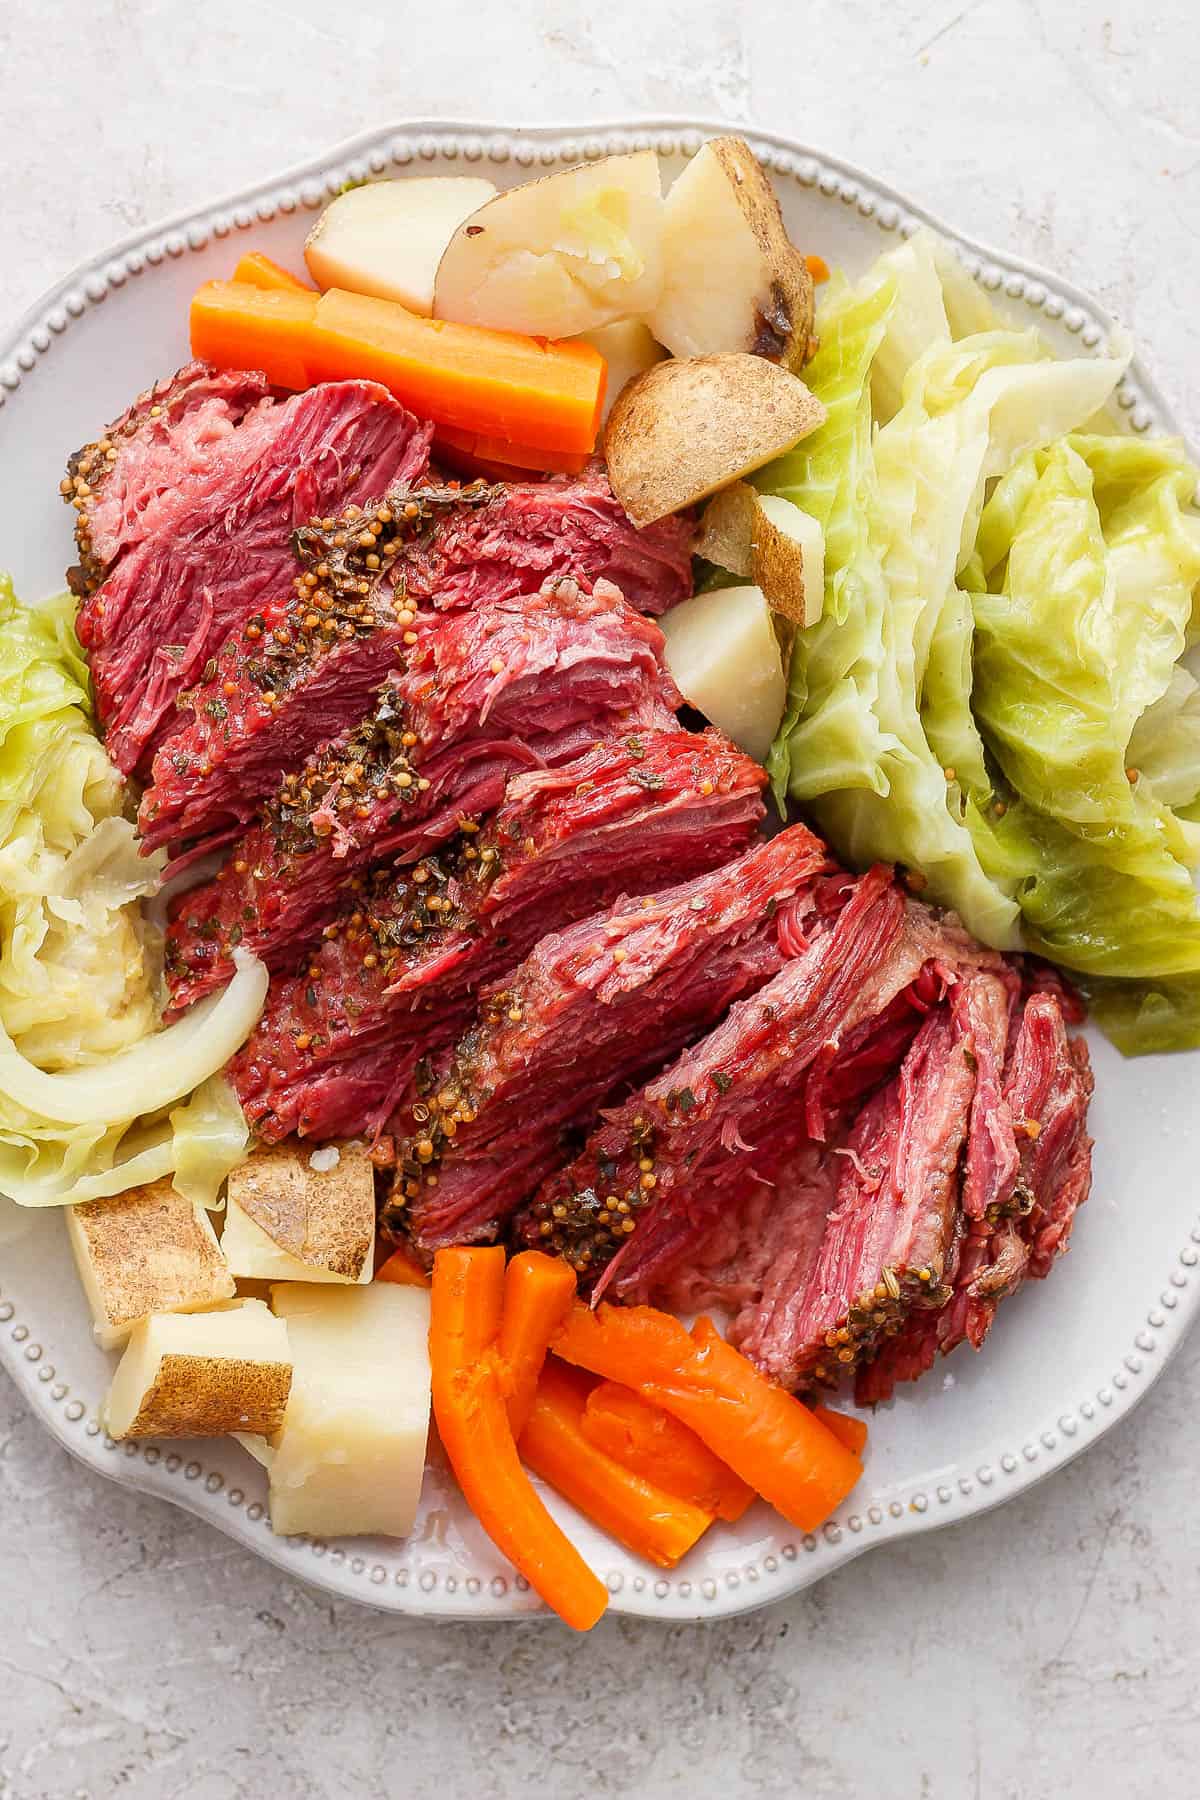 Corned beef sliced on a large white plate with some of the cooked veggies.